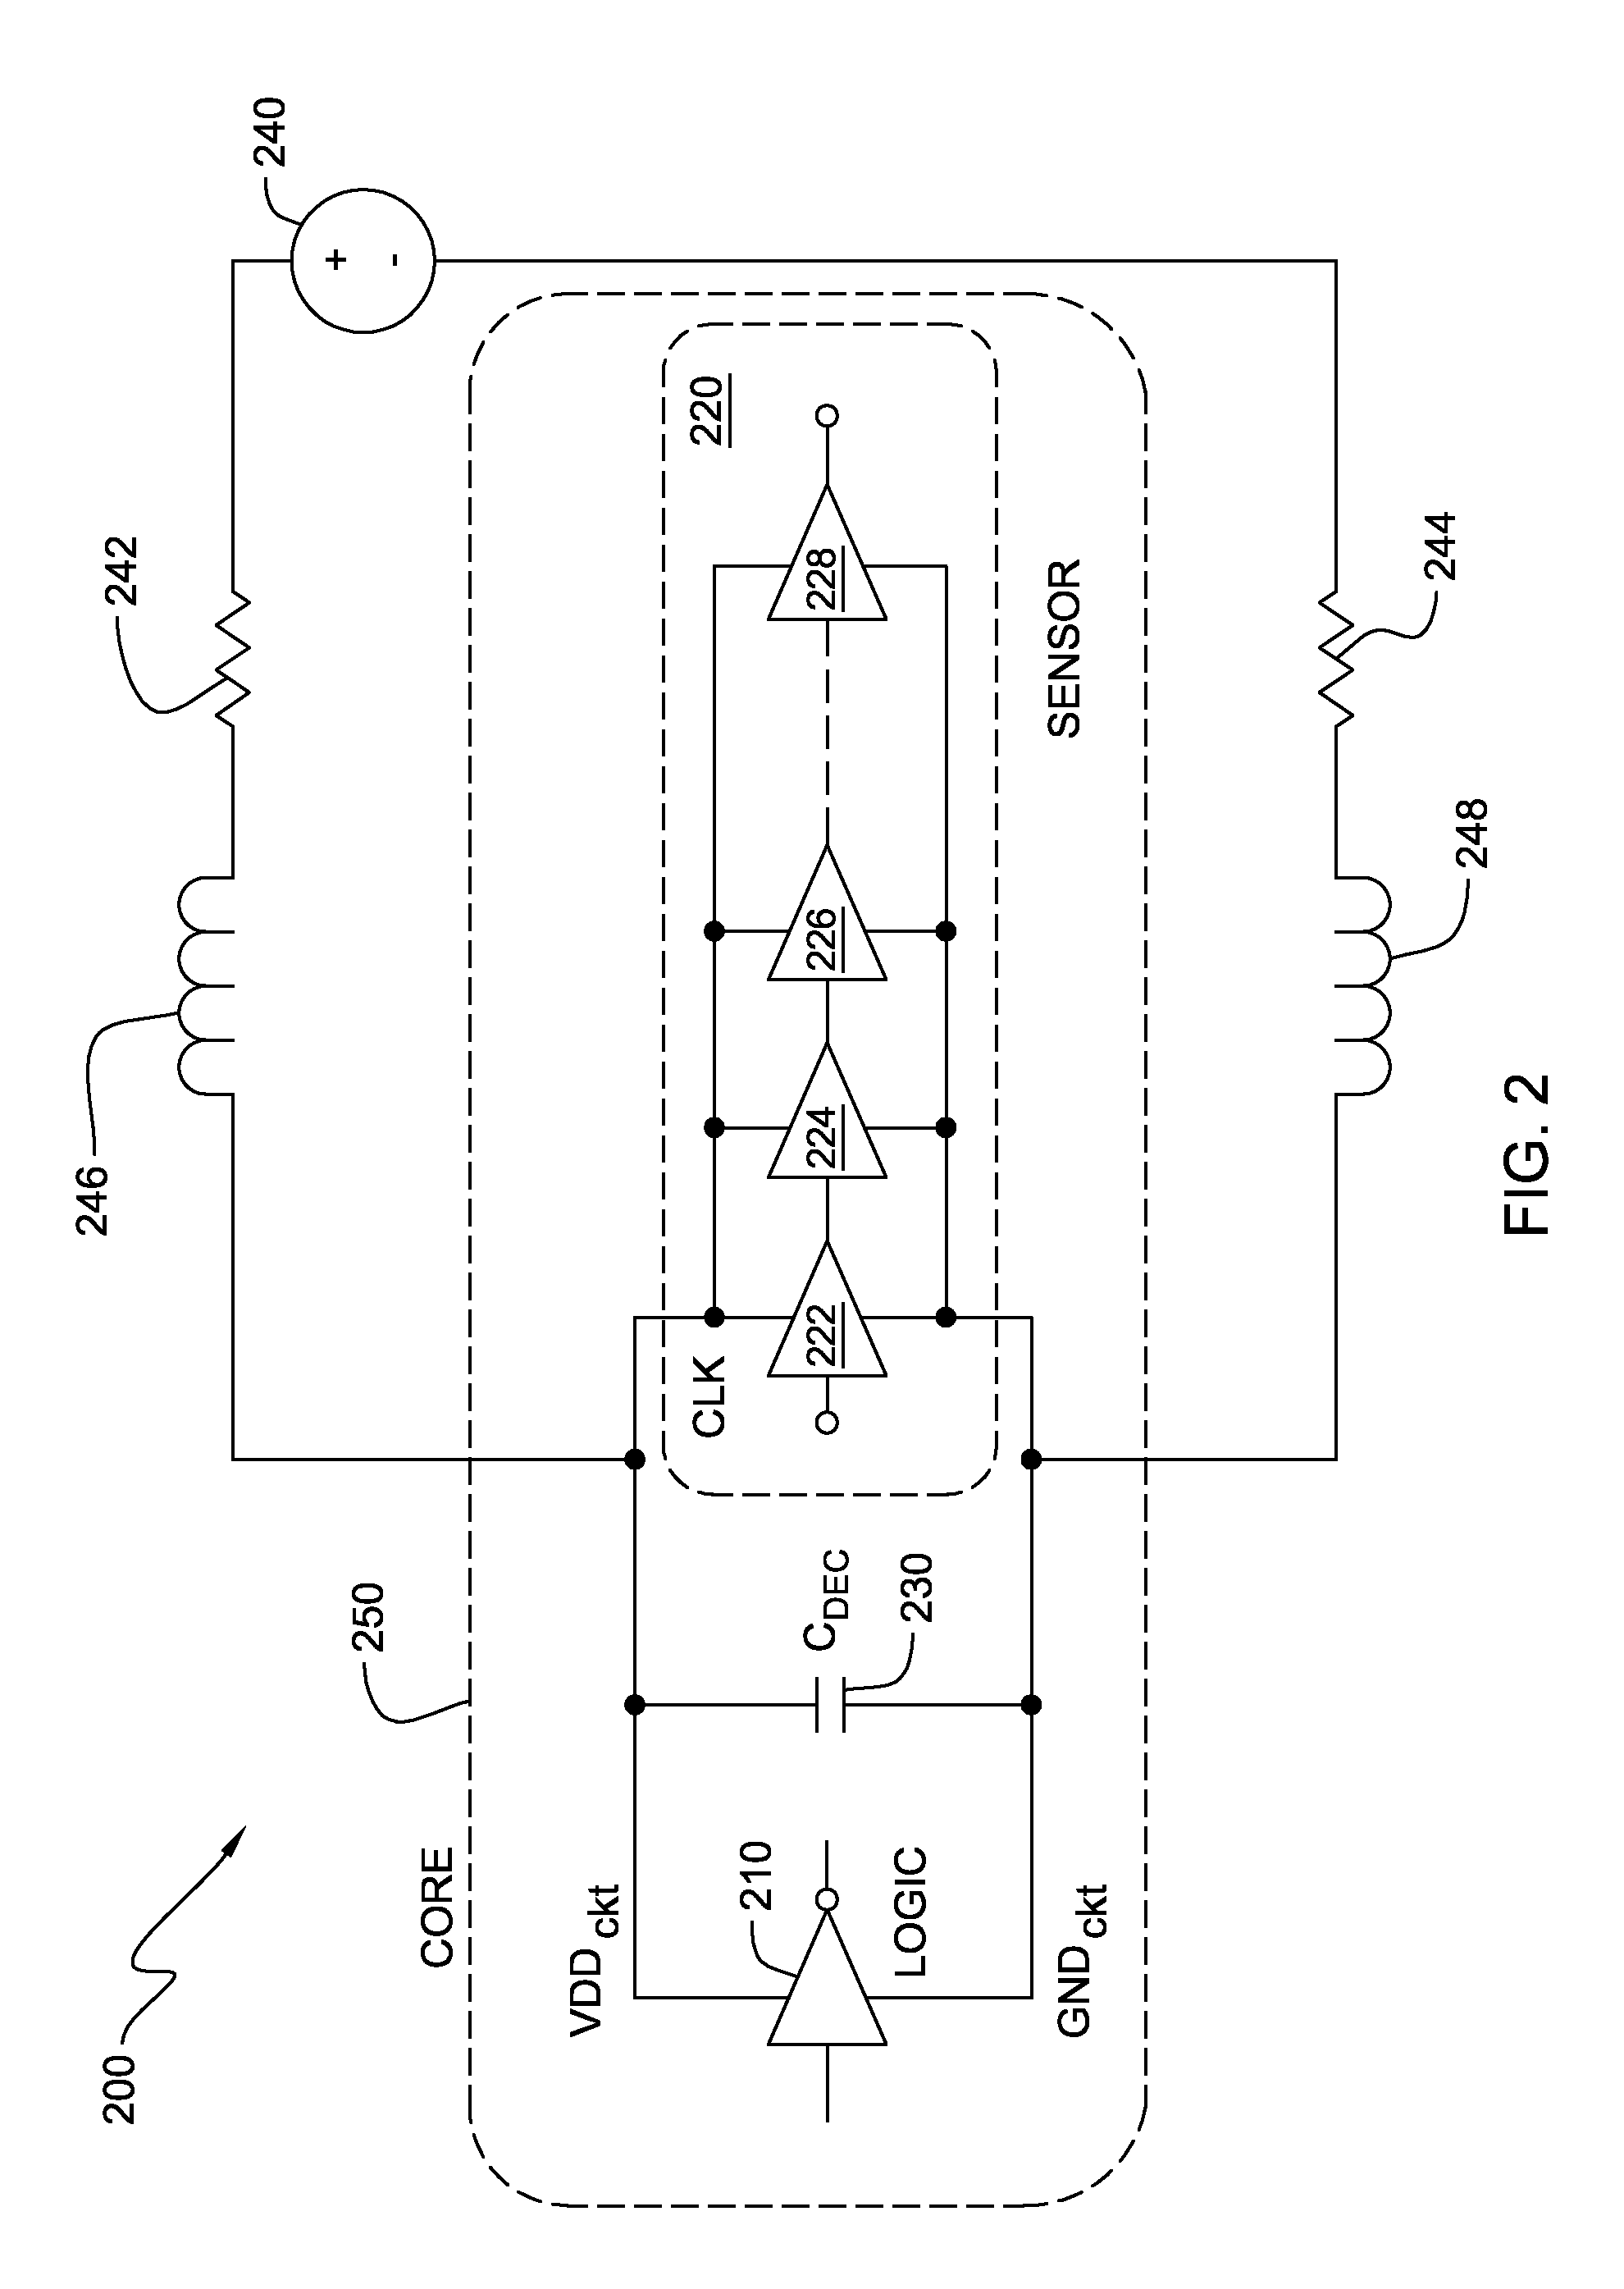 Apparatus and method for micro performance tuning of a clocked digital system